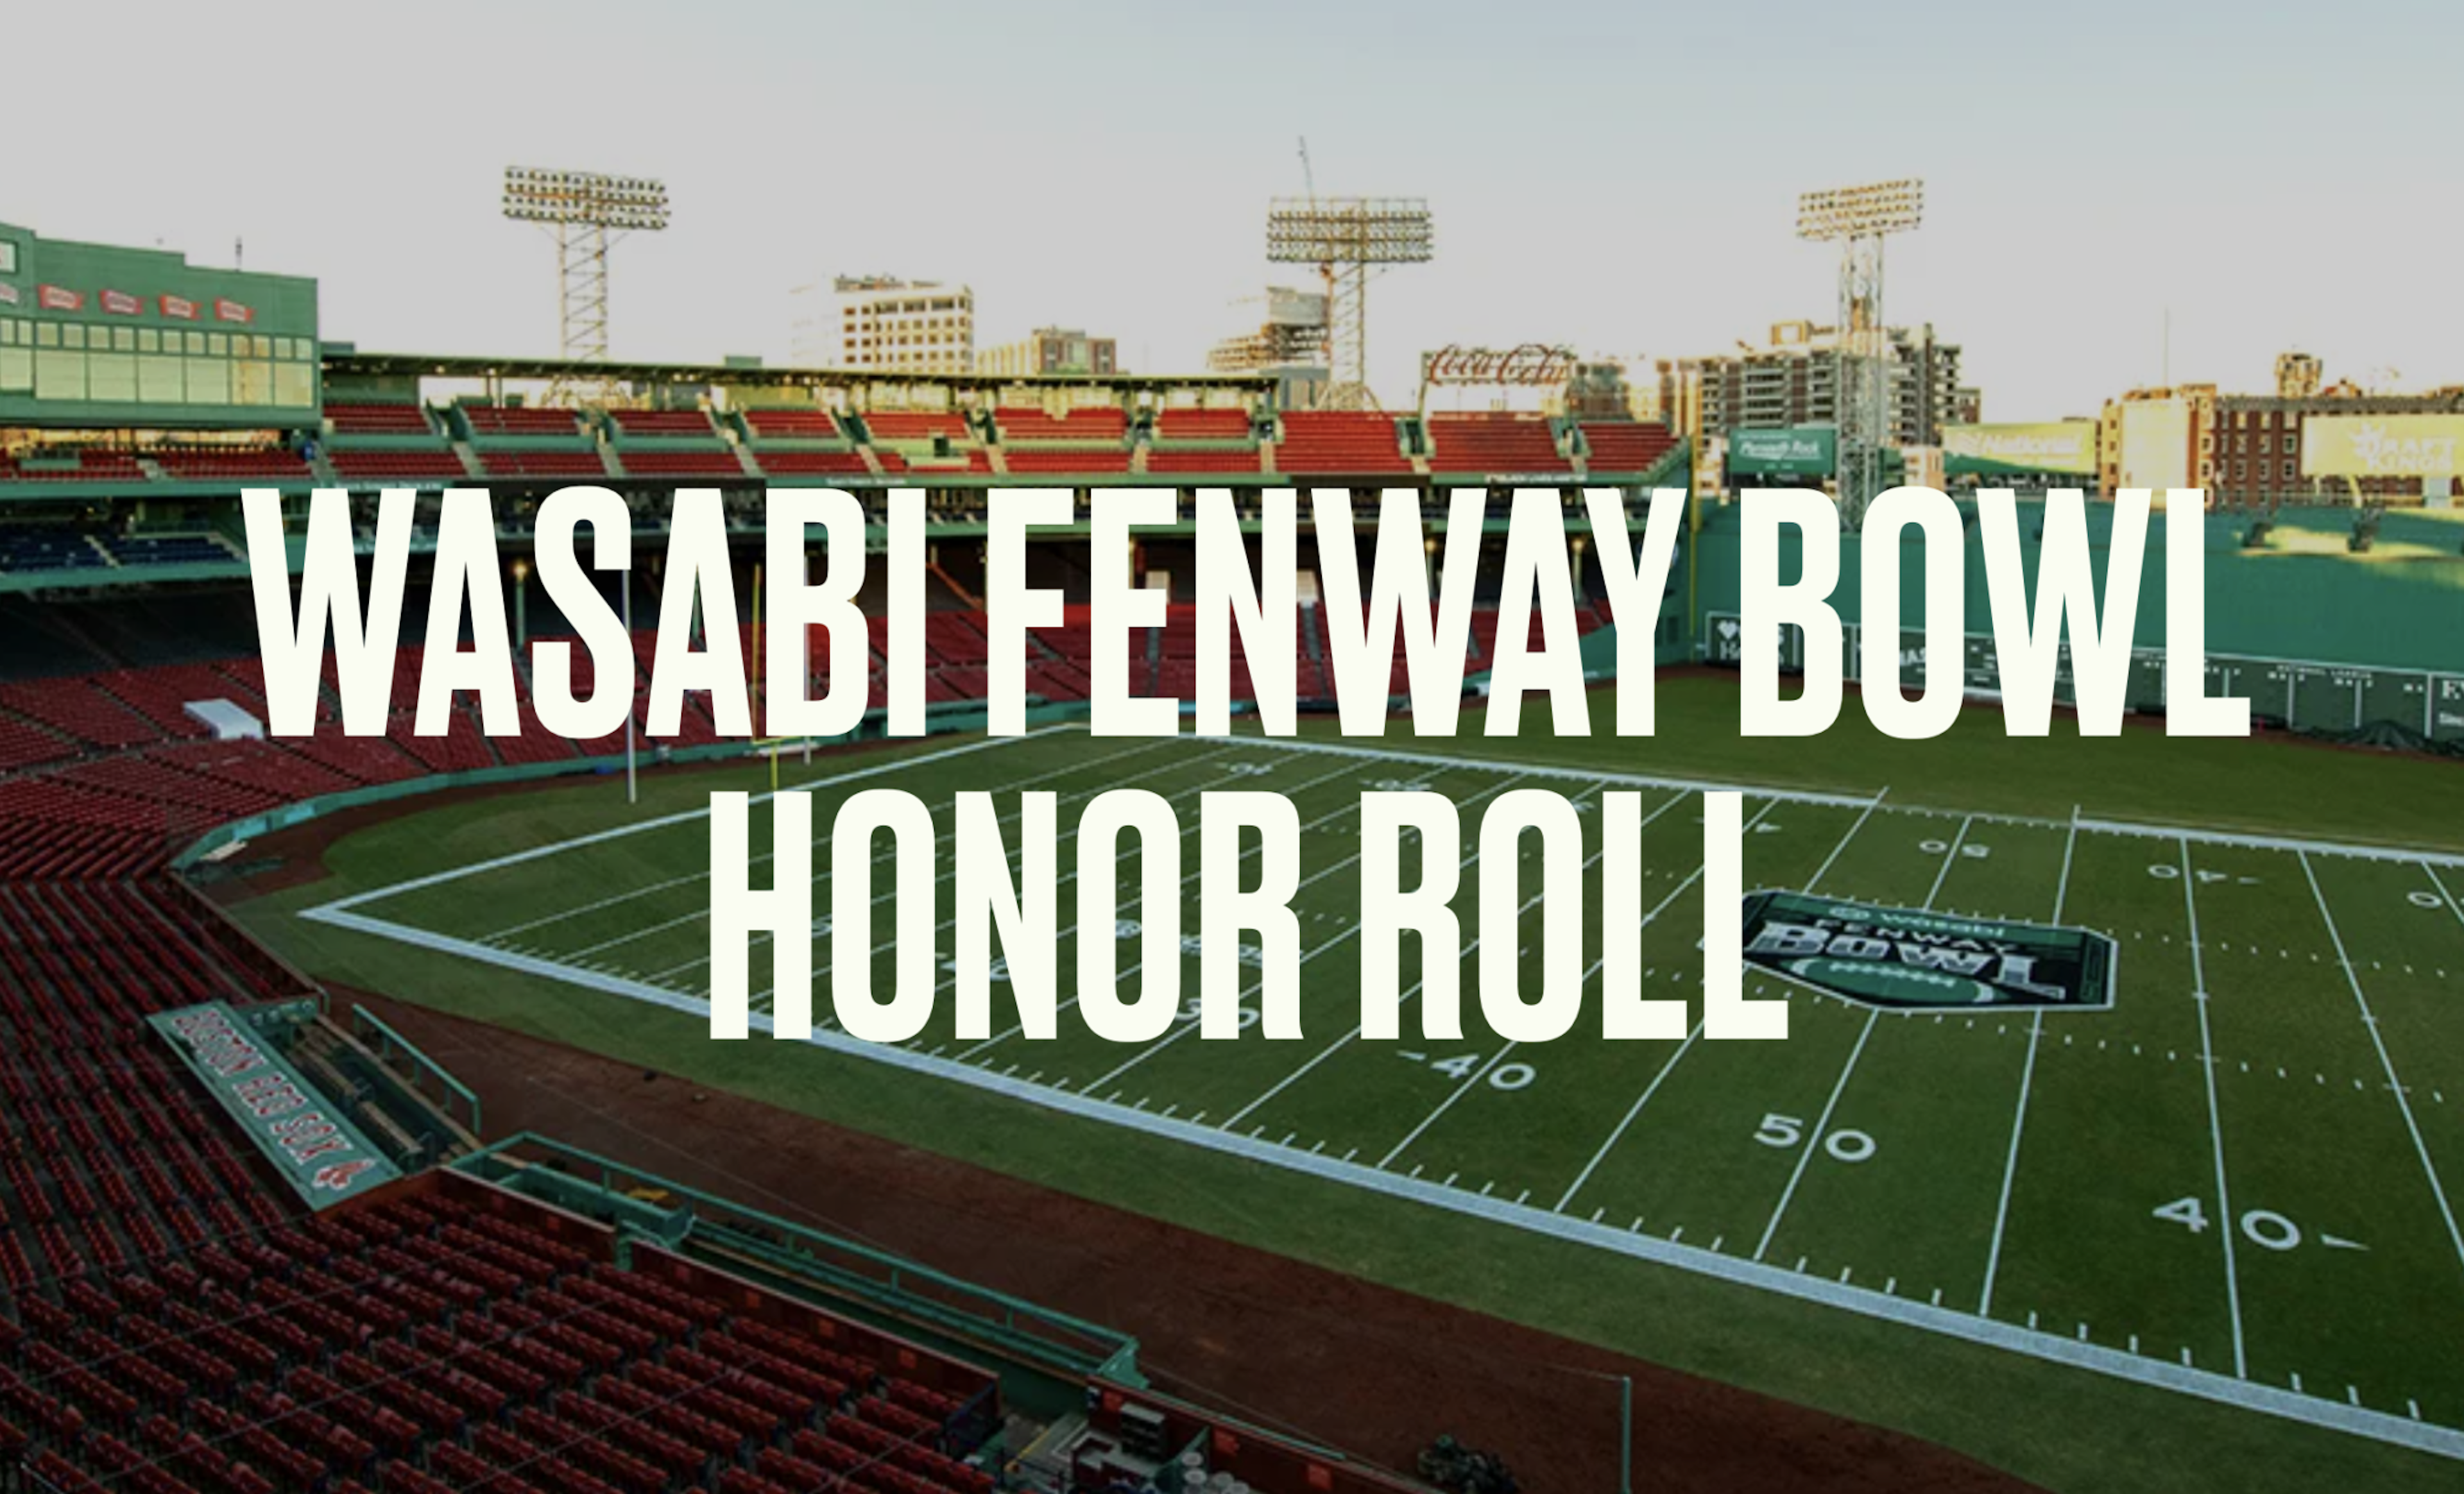 fenway park with Wasabi Fenway Bowl Honor Roll text overlayed